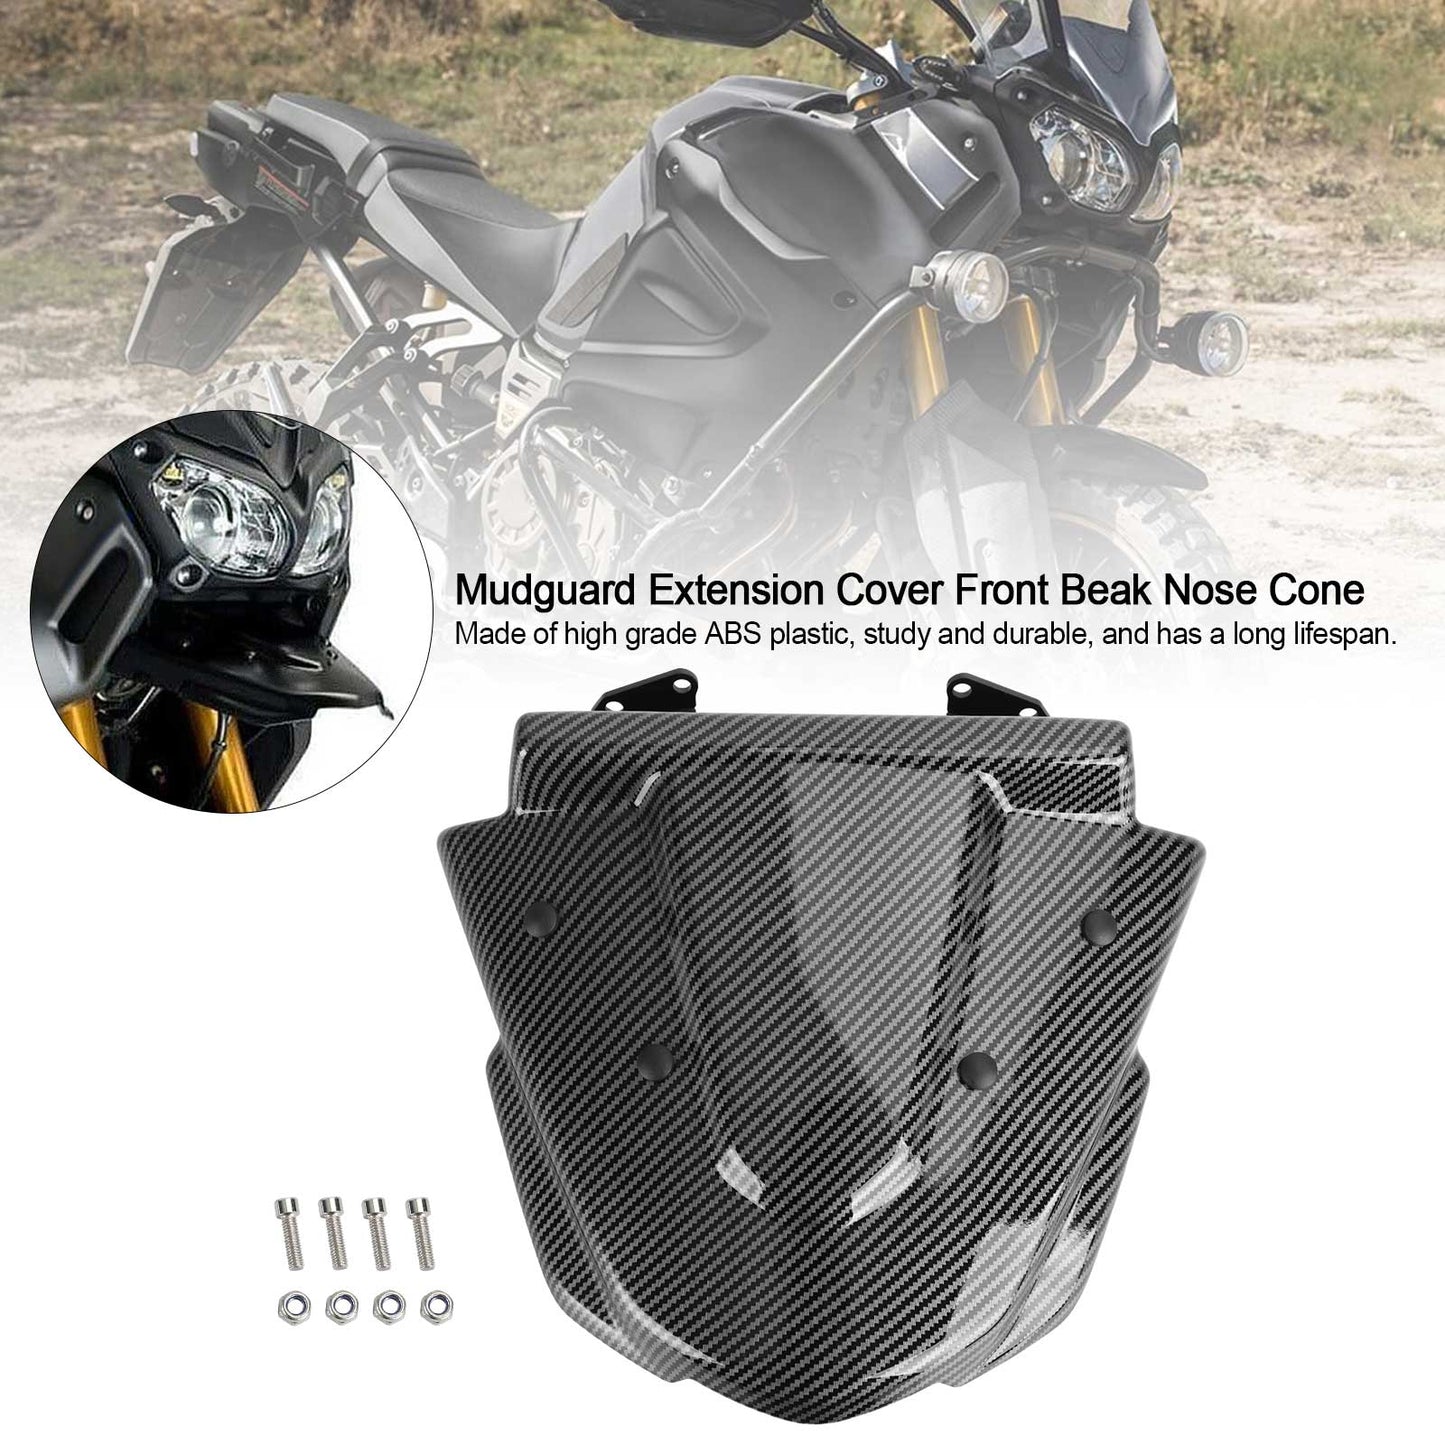 Mudguard Extension Cover Front Beak Nose Cone for Yamaha XT1200Z 2014-2021 Black